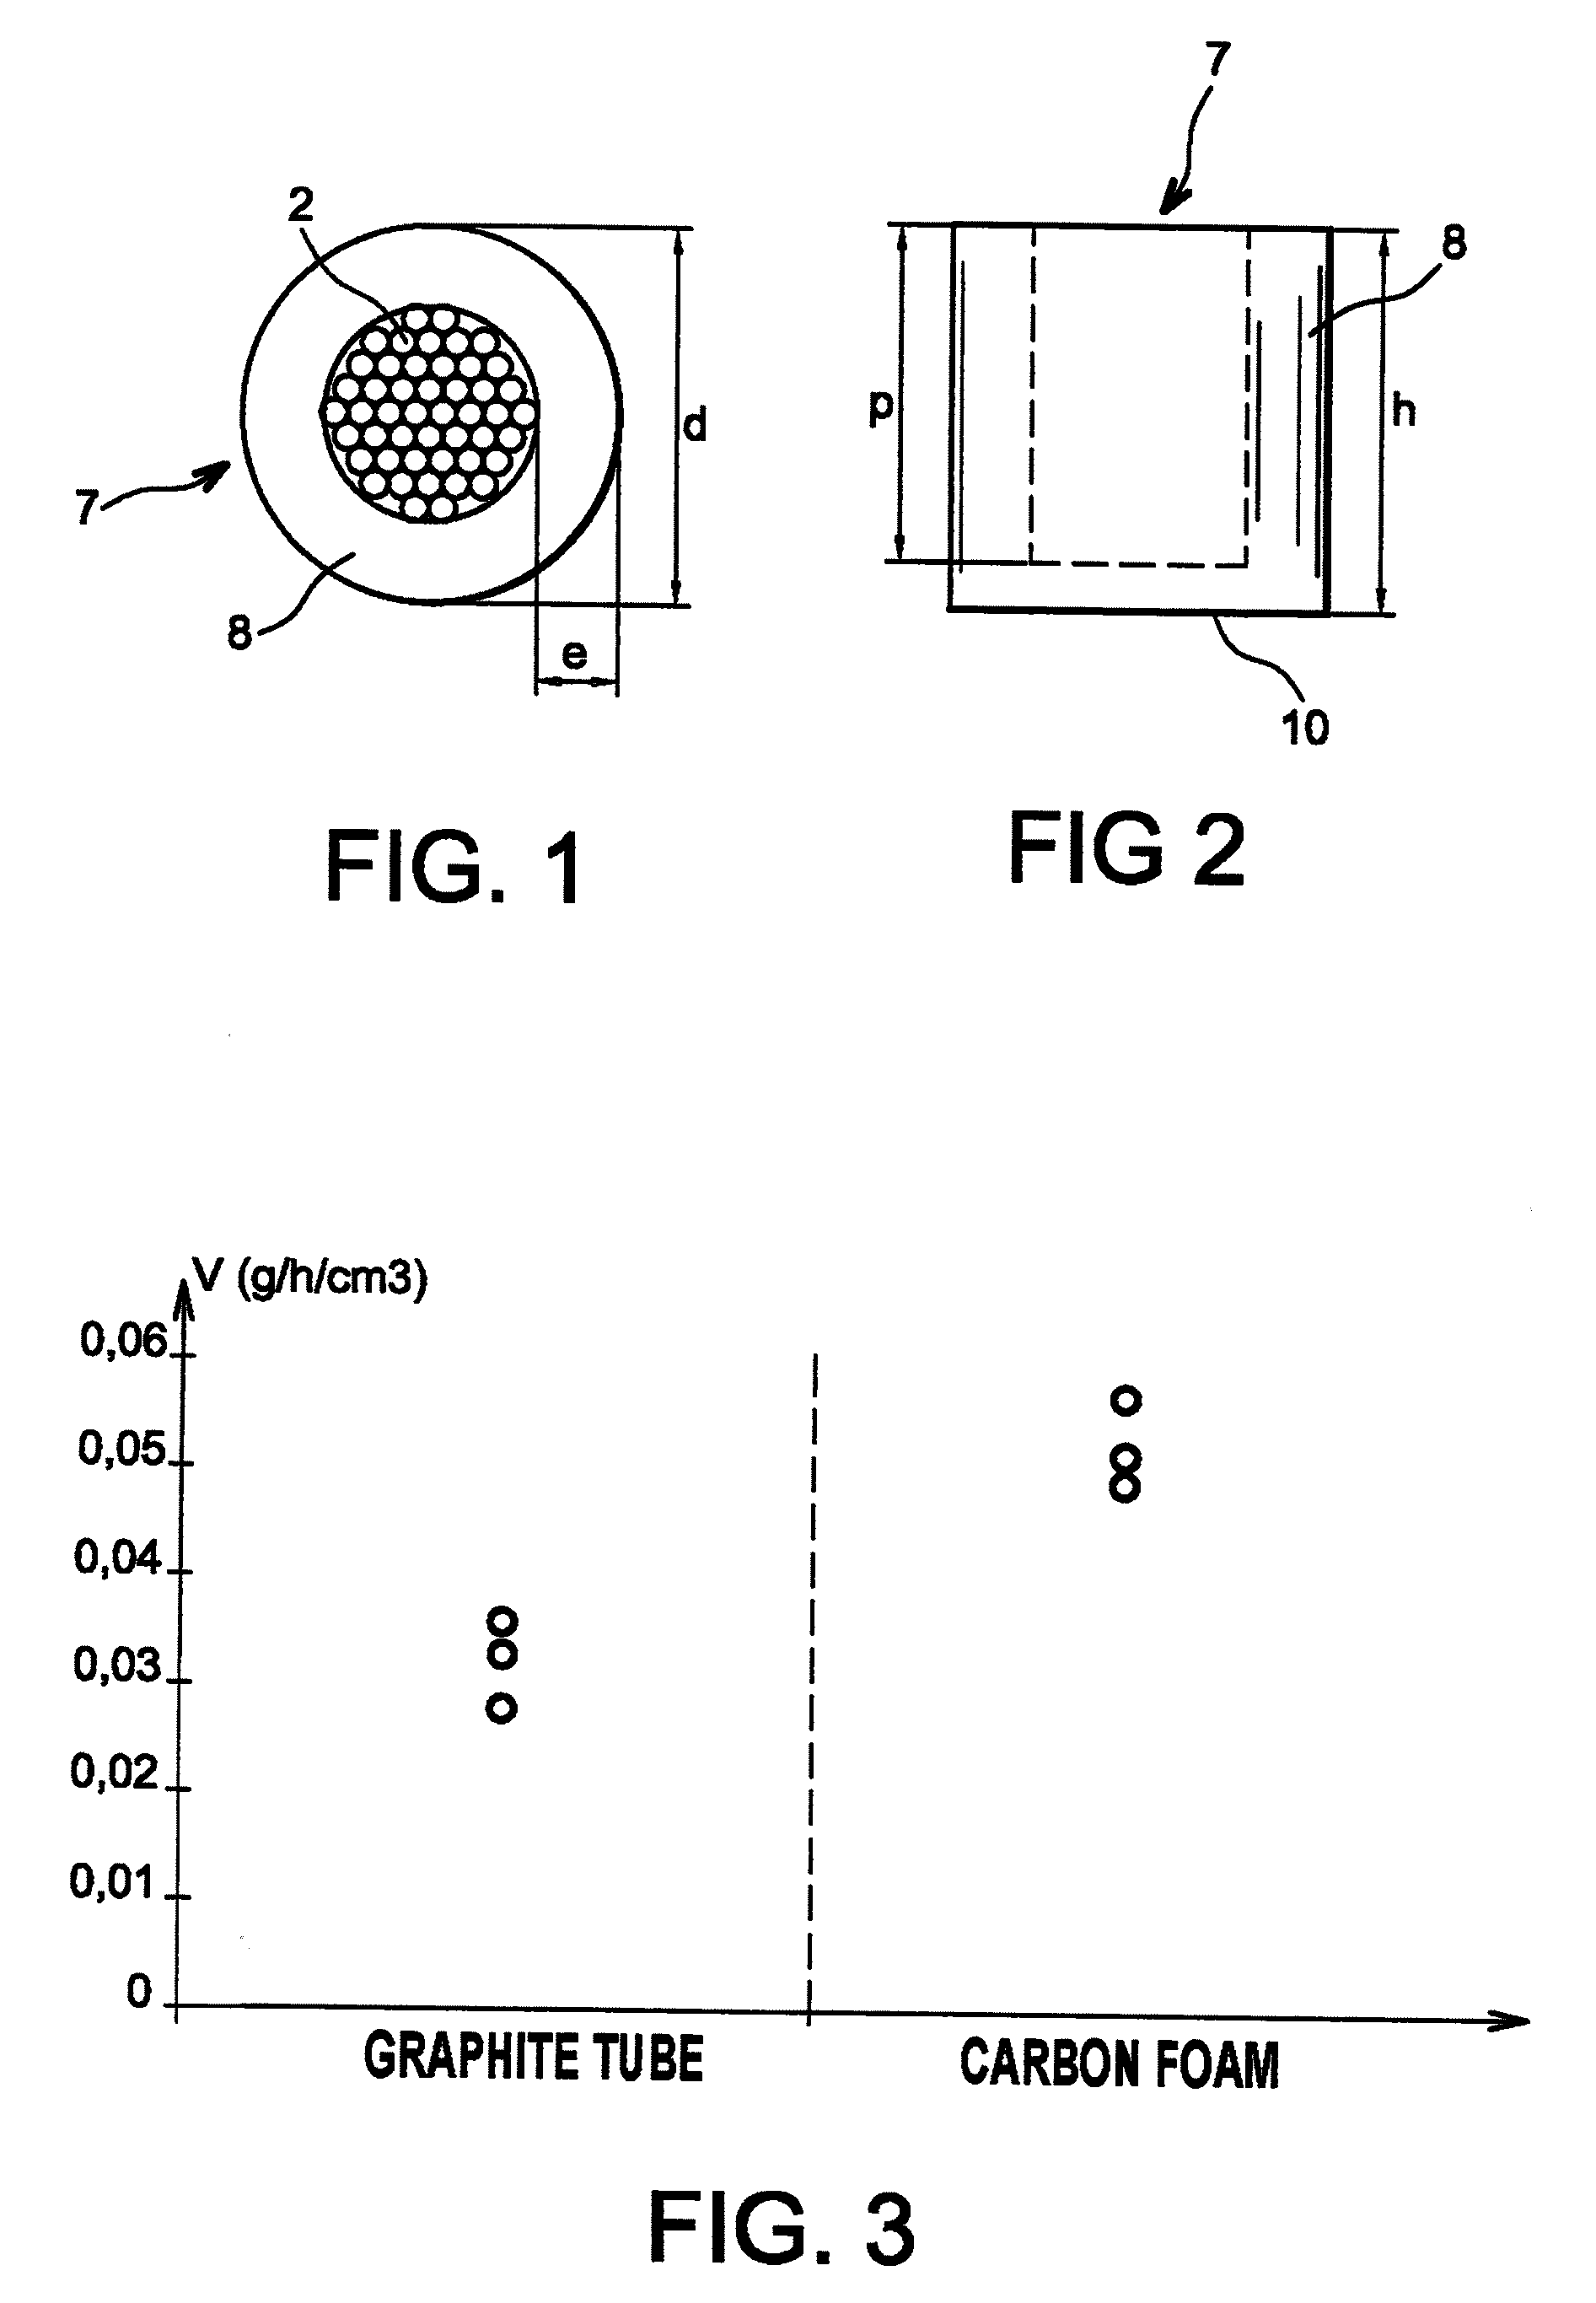 Method of manufacturing nuclear fuel elements and a container for implementing such a method